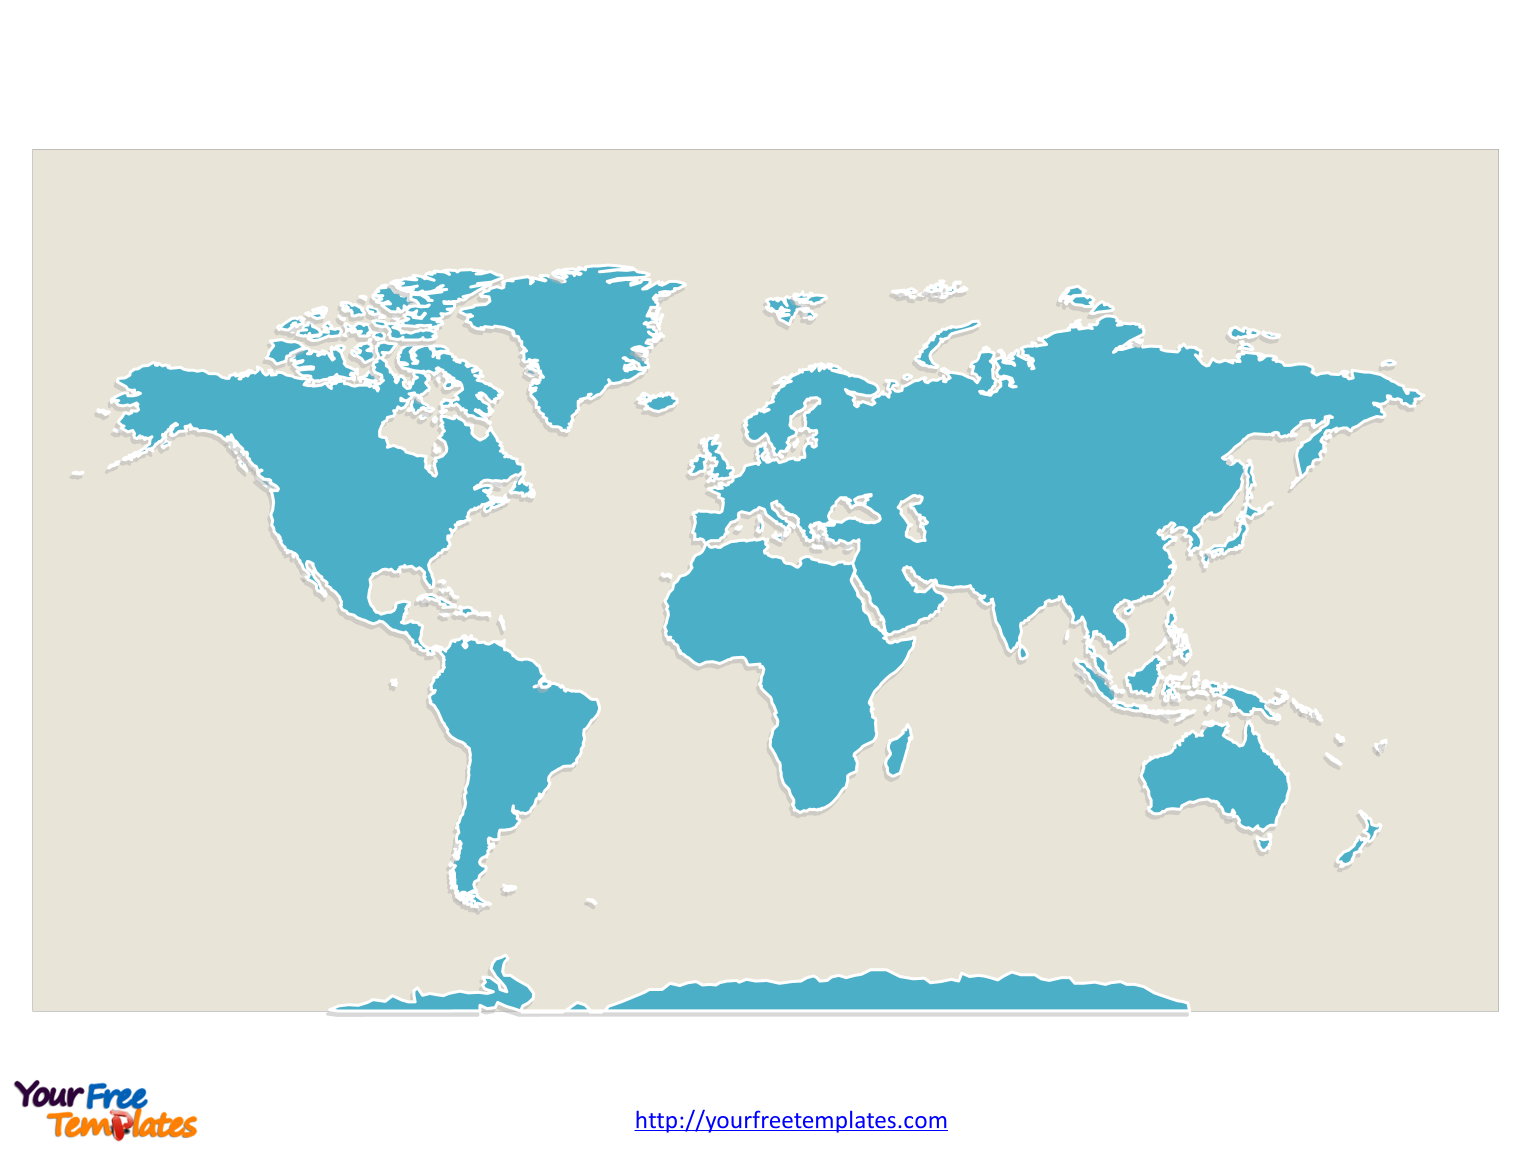 world-map-with-continents-free-powerpoint-templates